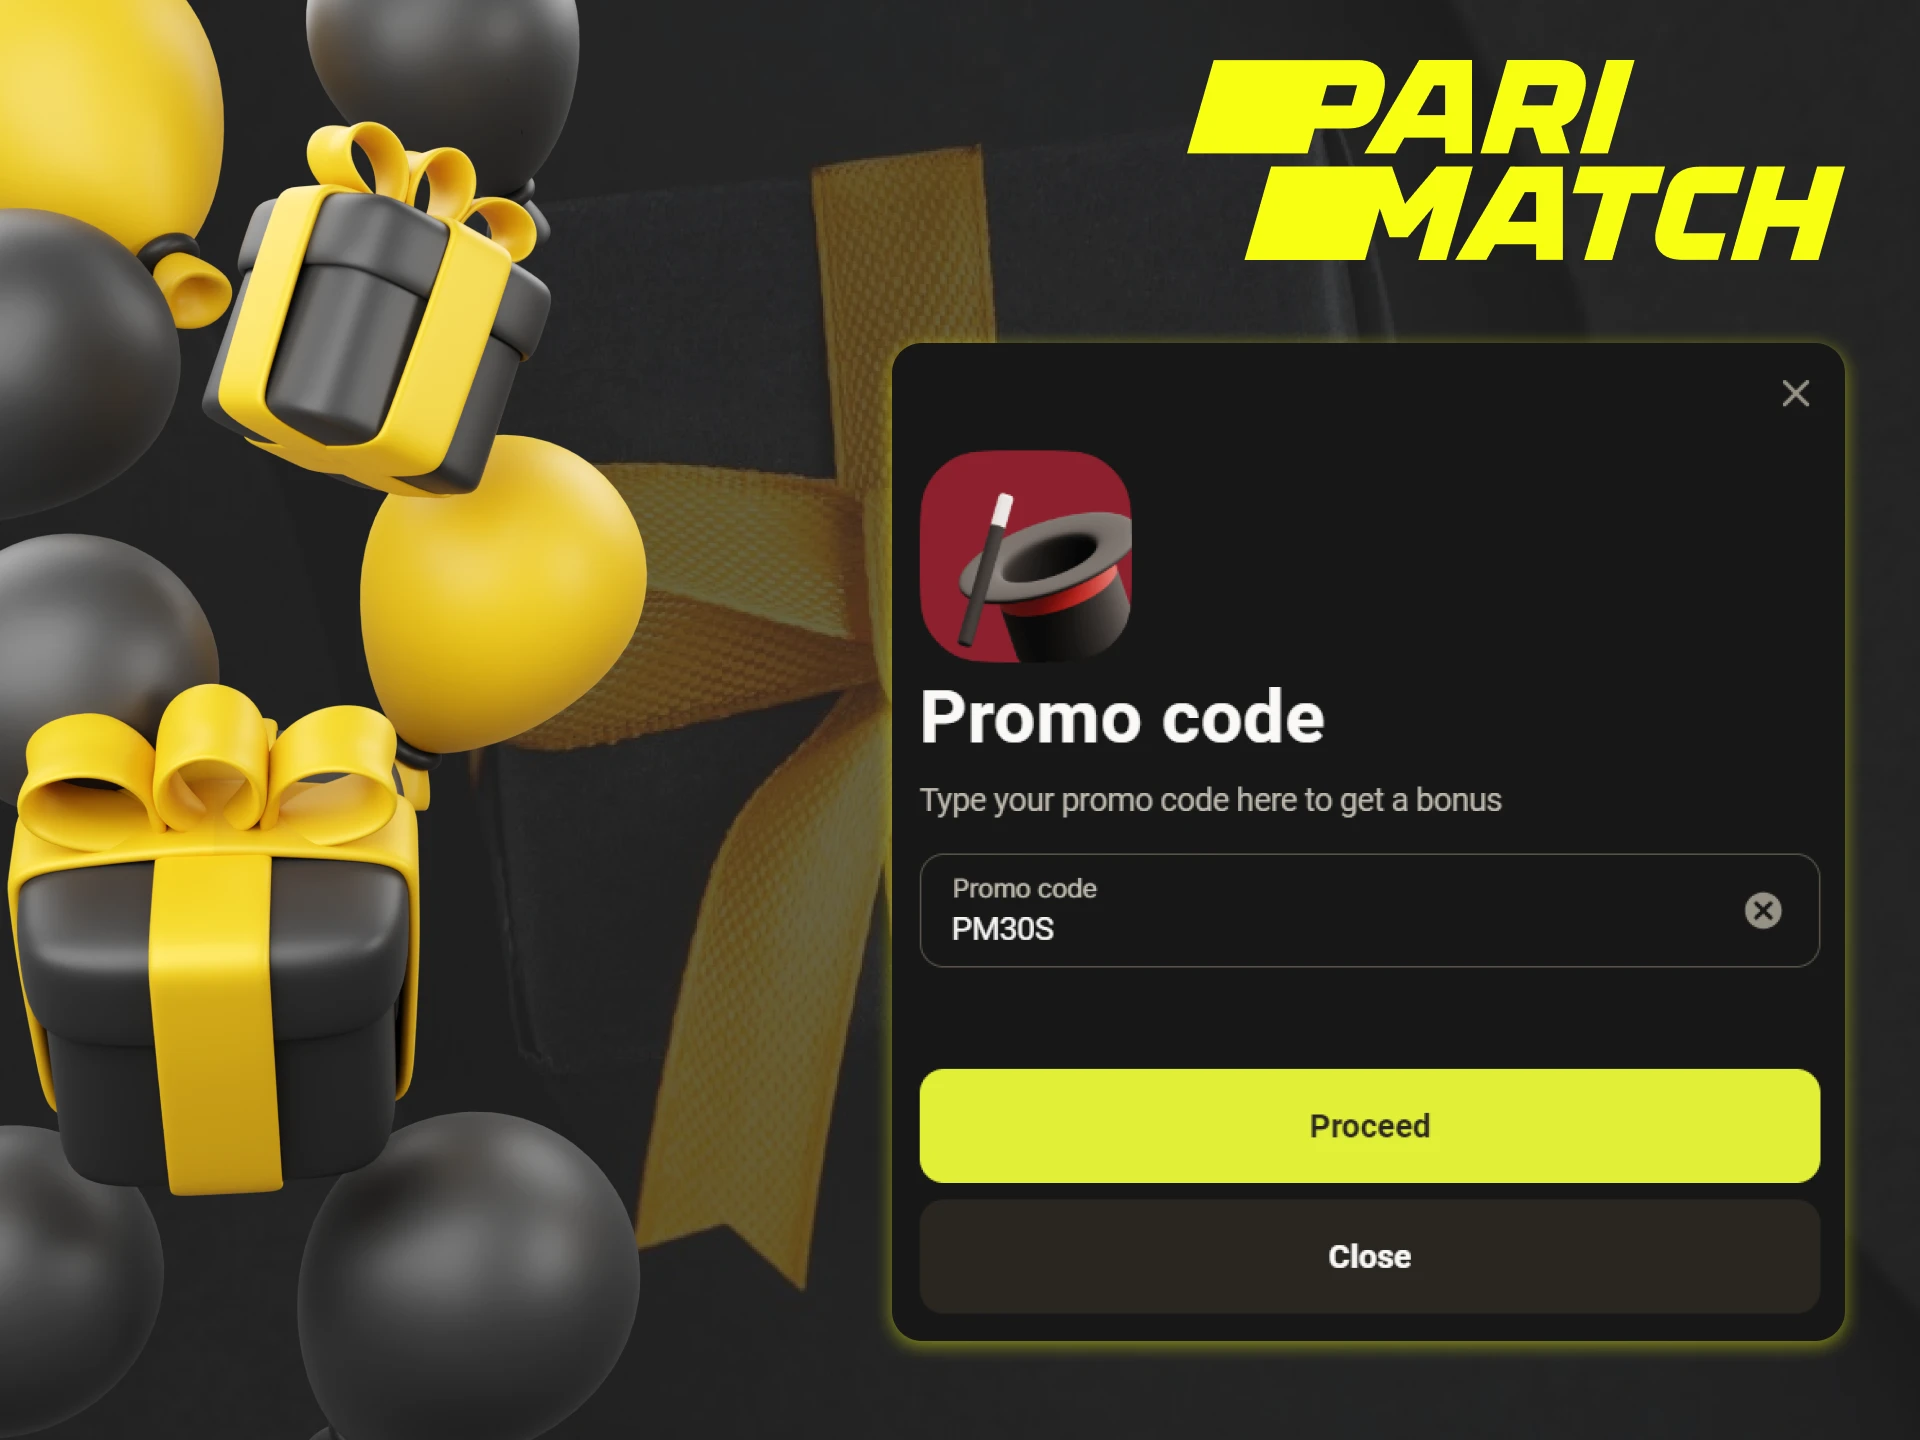 At Parimatch, use our promo code to receive a nice bonus.